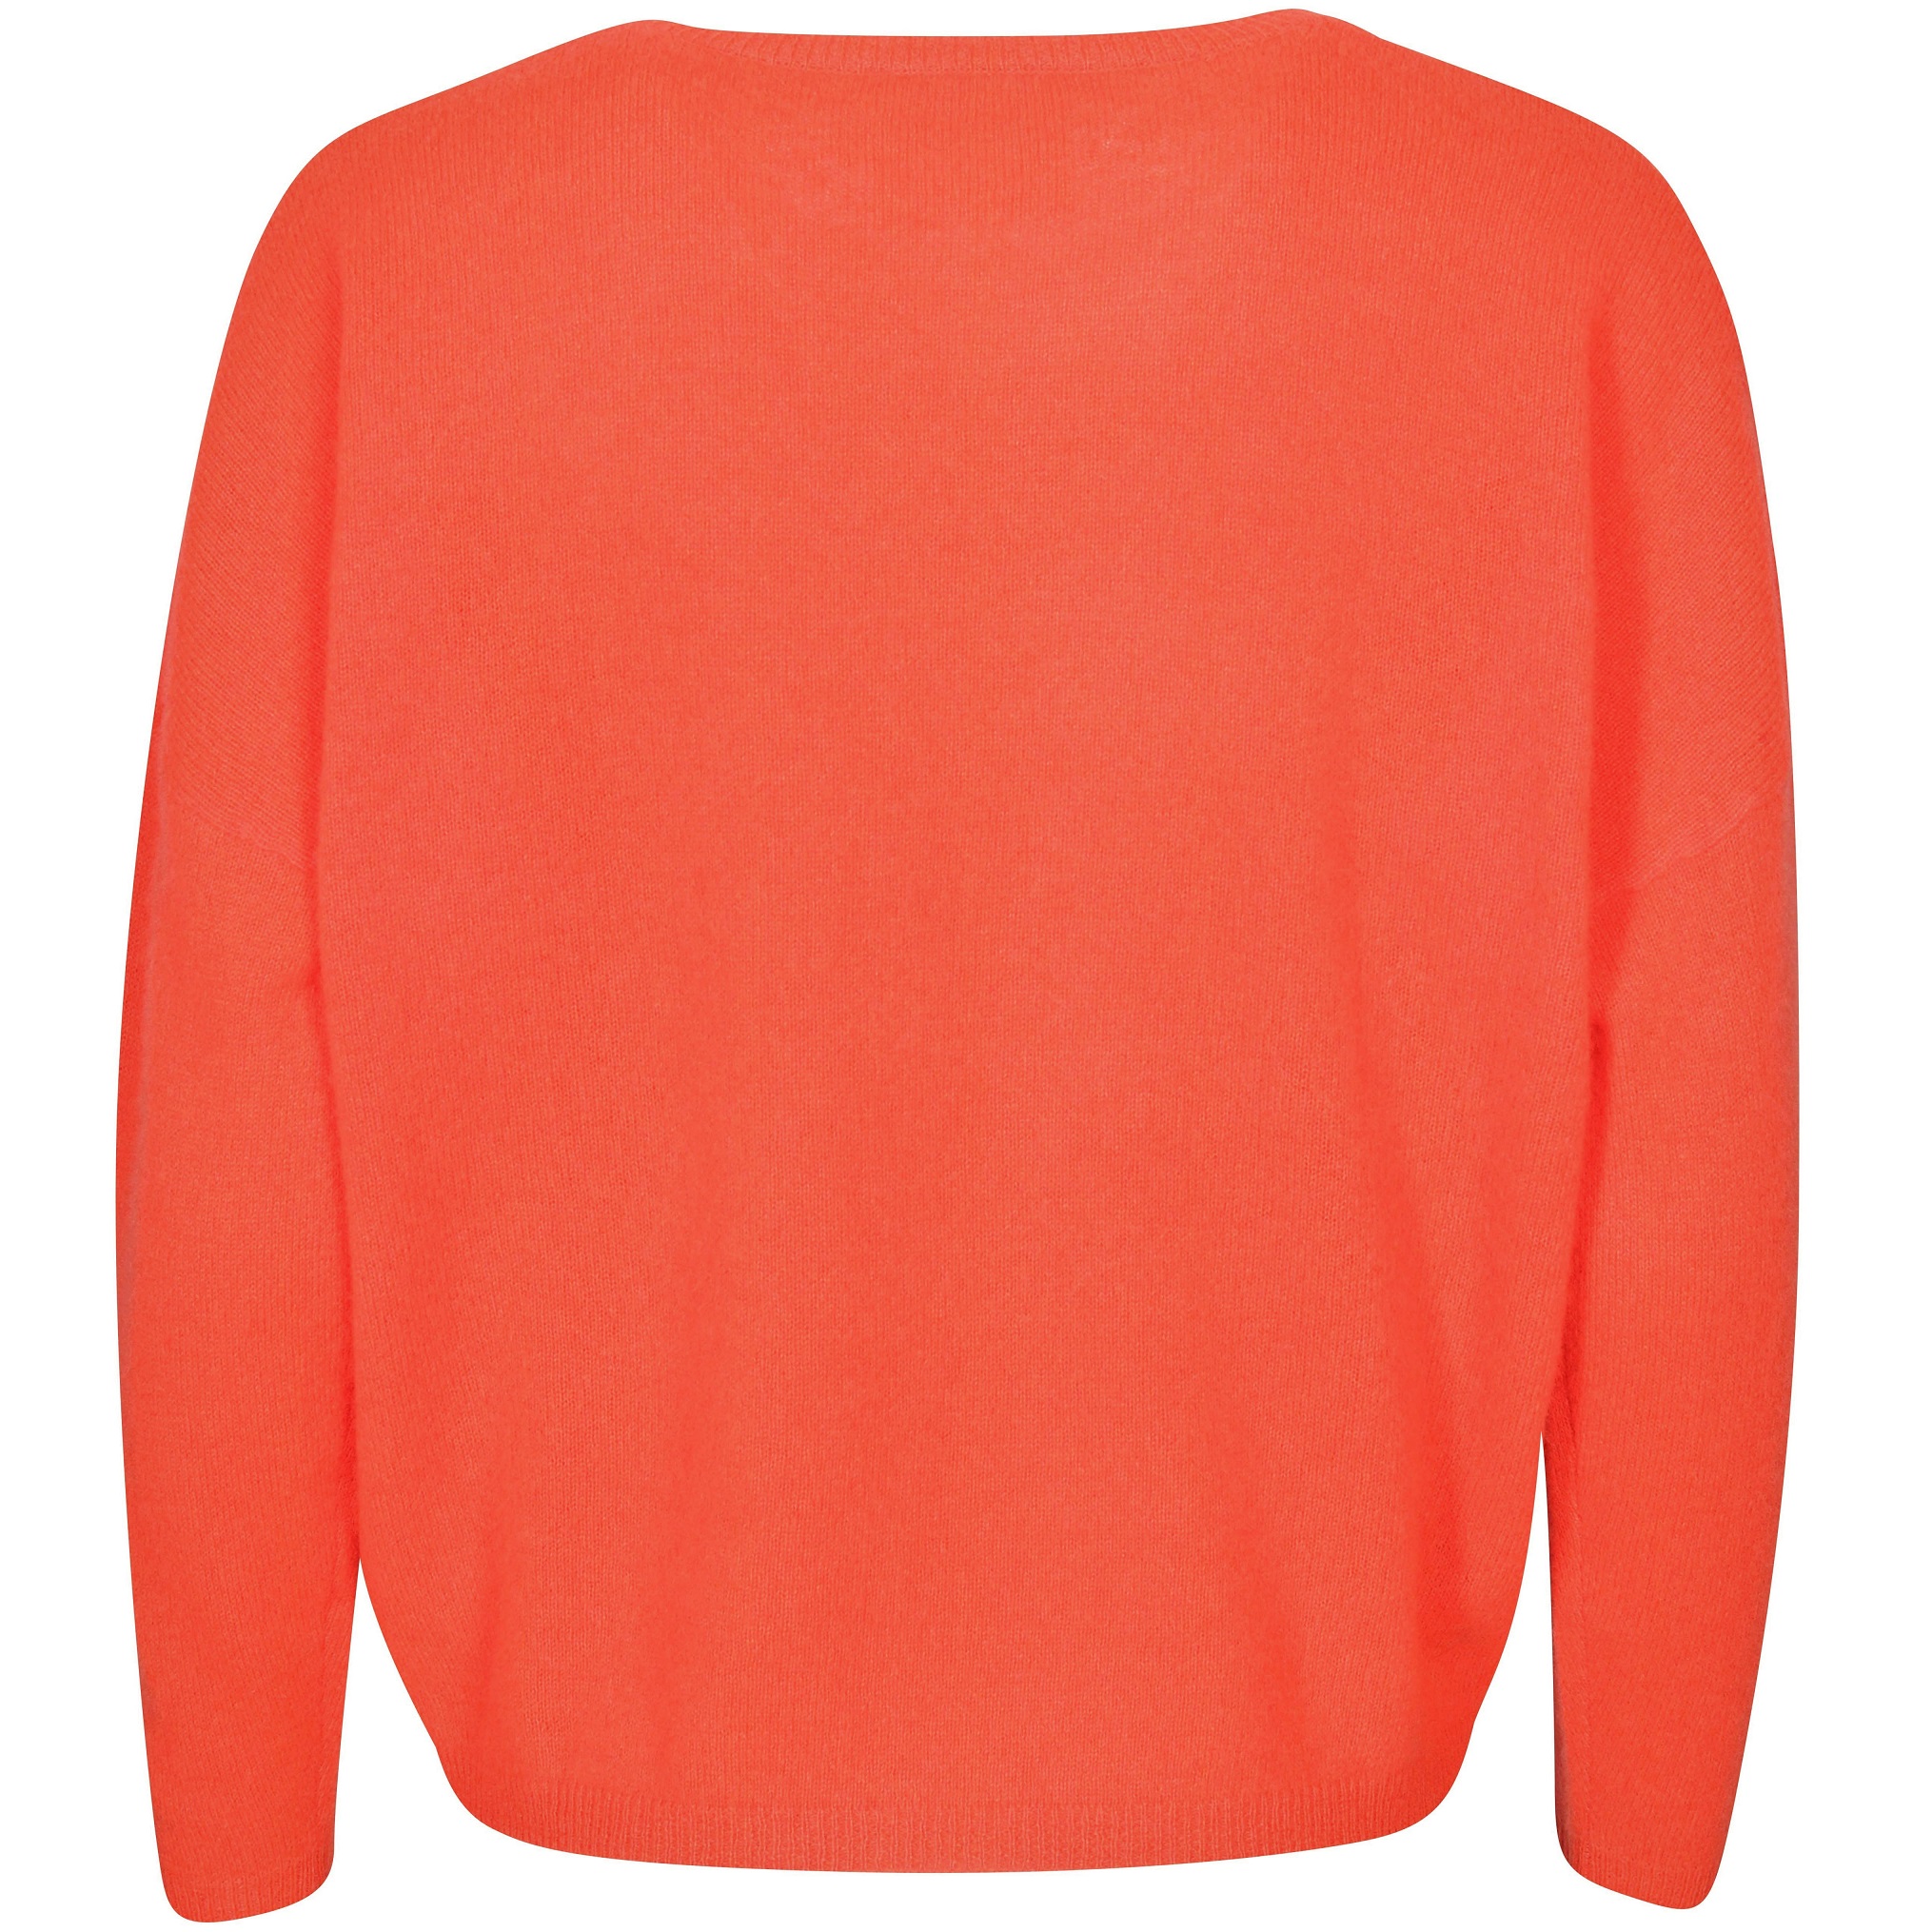 Absolut Cashmere Kaira Cashmere Pullover in Corail Fluo M